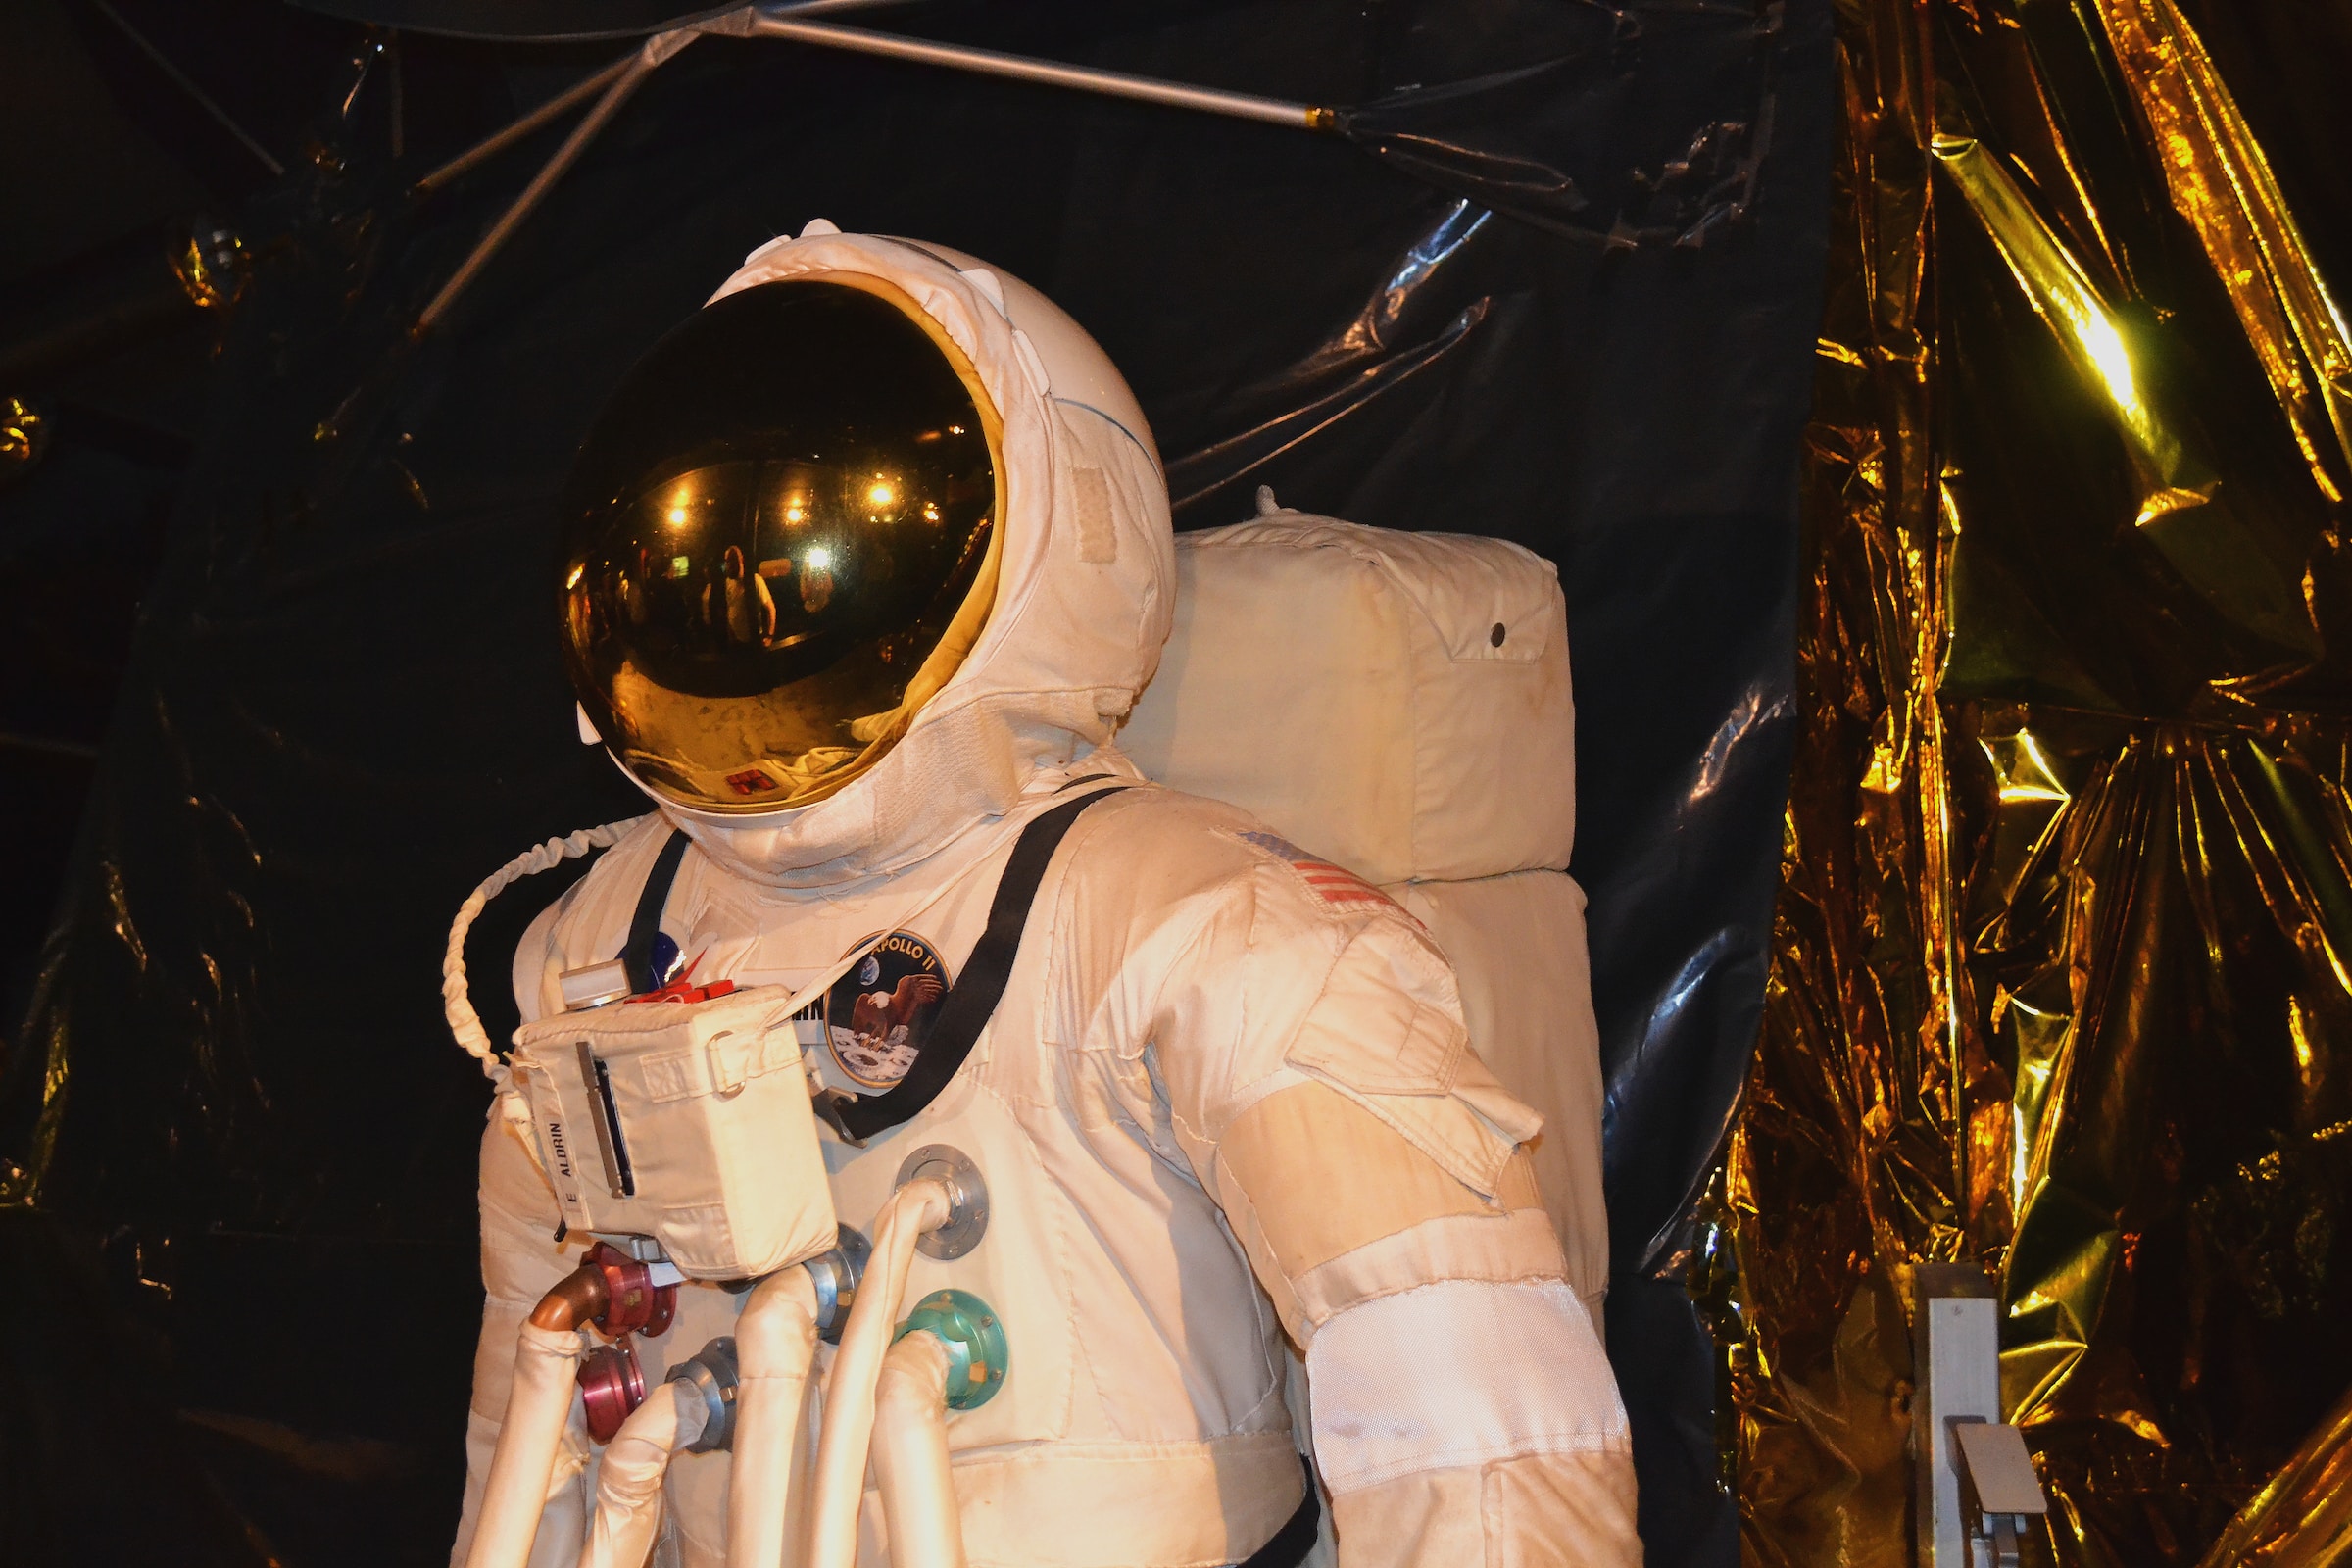 Astronauts suit on display at Science Museum